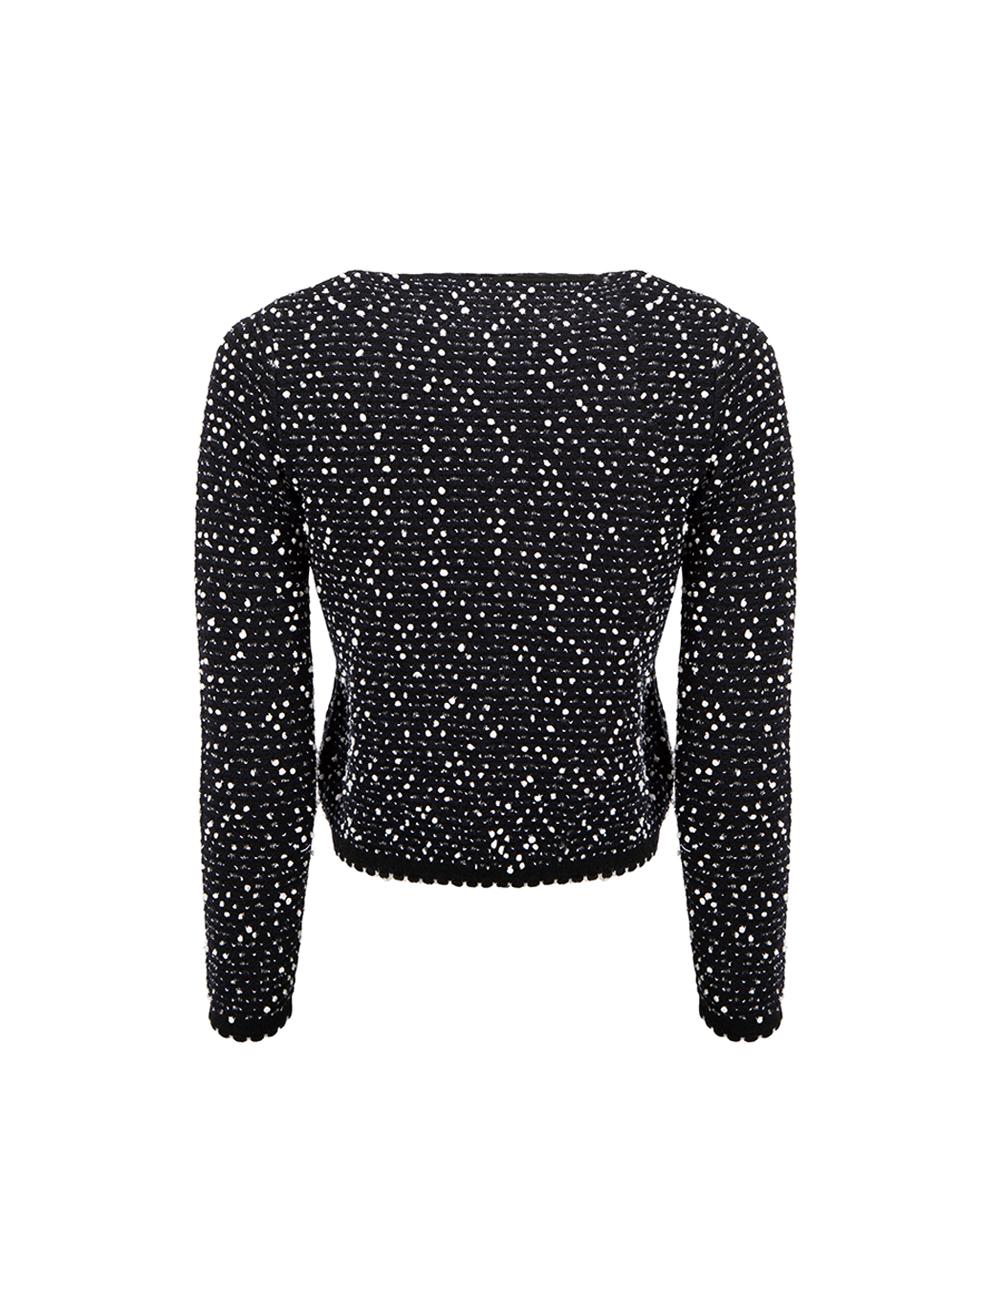 Oscar de la Renta Black Wool Dotted Cropped Knitted Cardigan Size S In Good Condition For Sale In London, GB